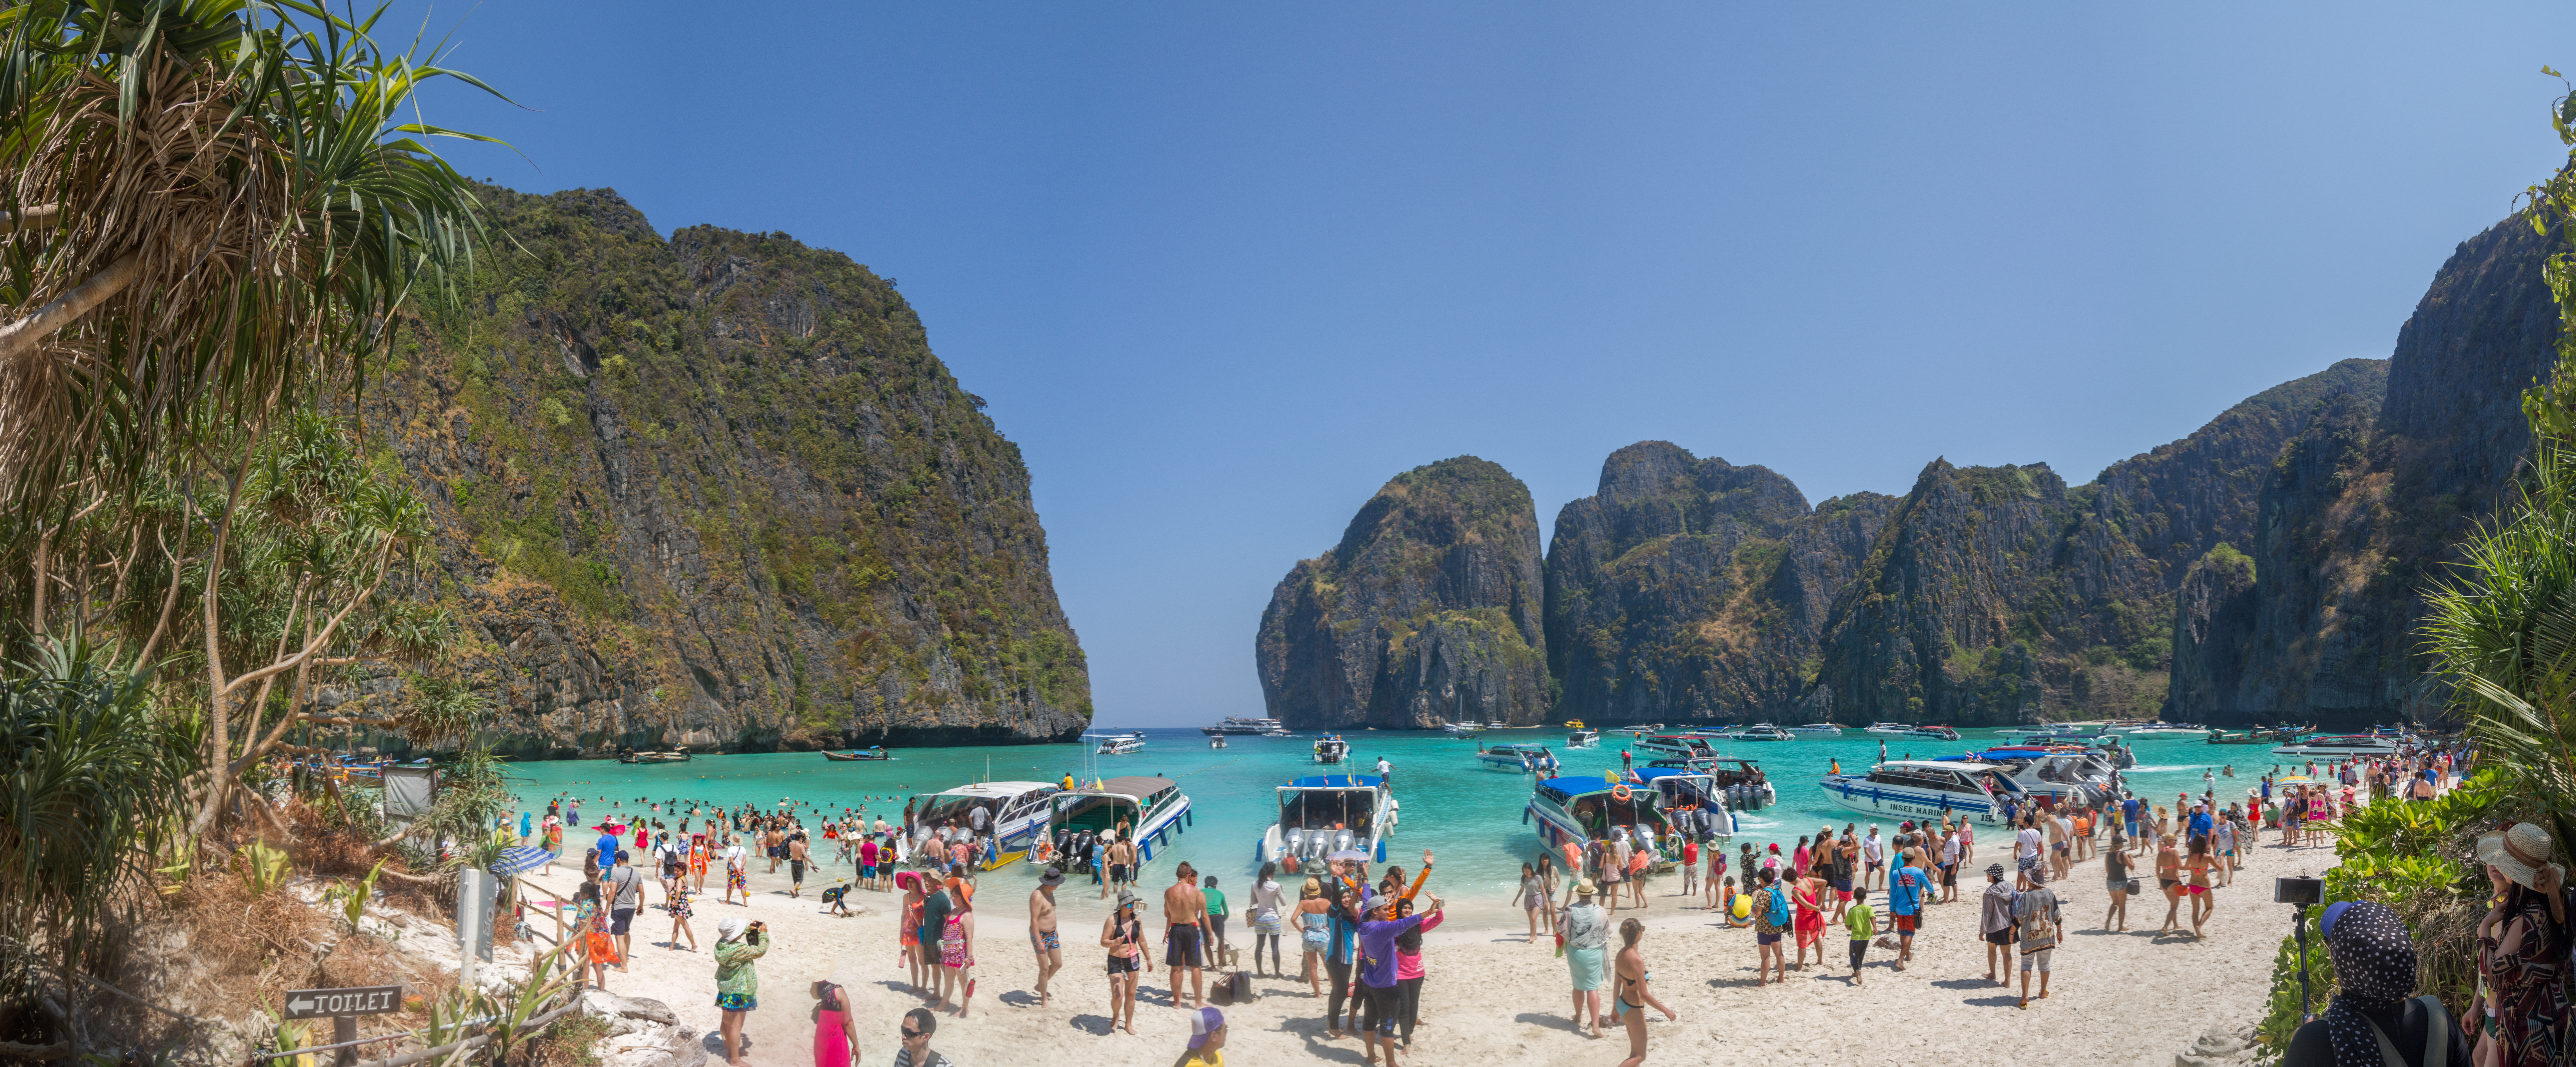 a group of people on a beach with boats and boats in the water with Phi Phi Islands in the background